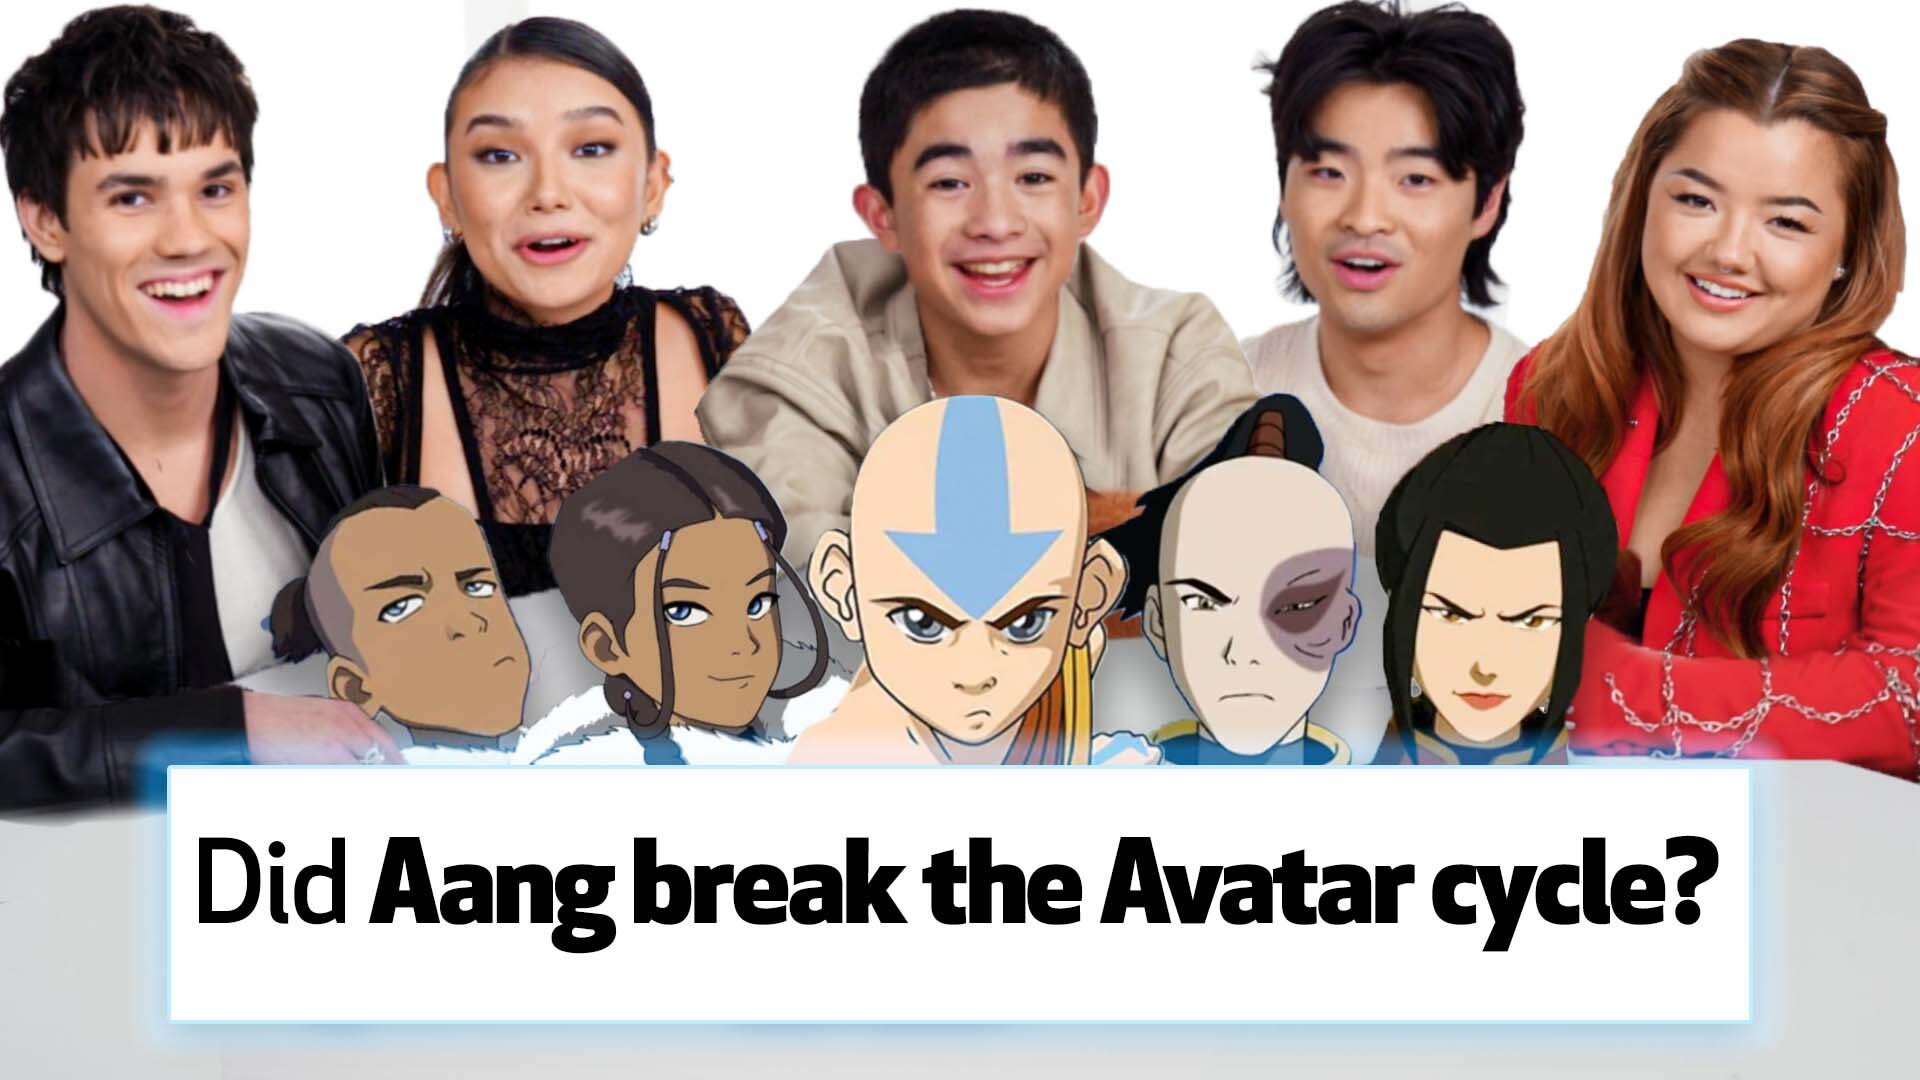 Watch 'Avatar The Last Airbender' Cast Answer Avatar's Most Googled